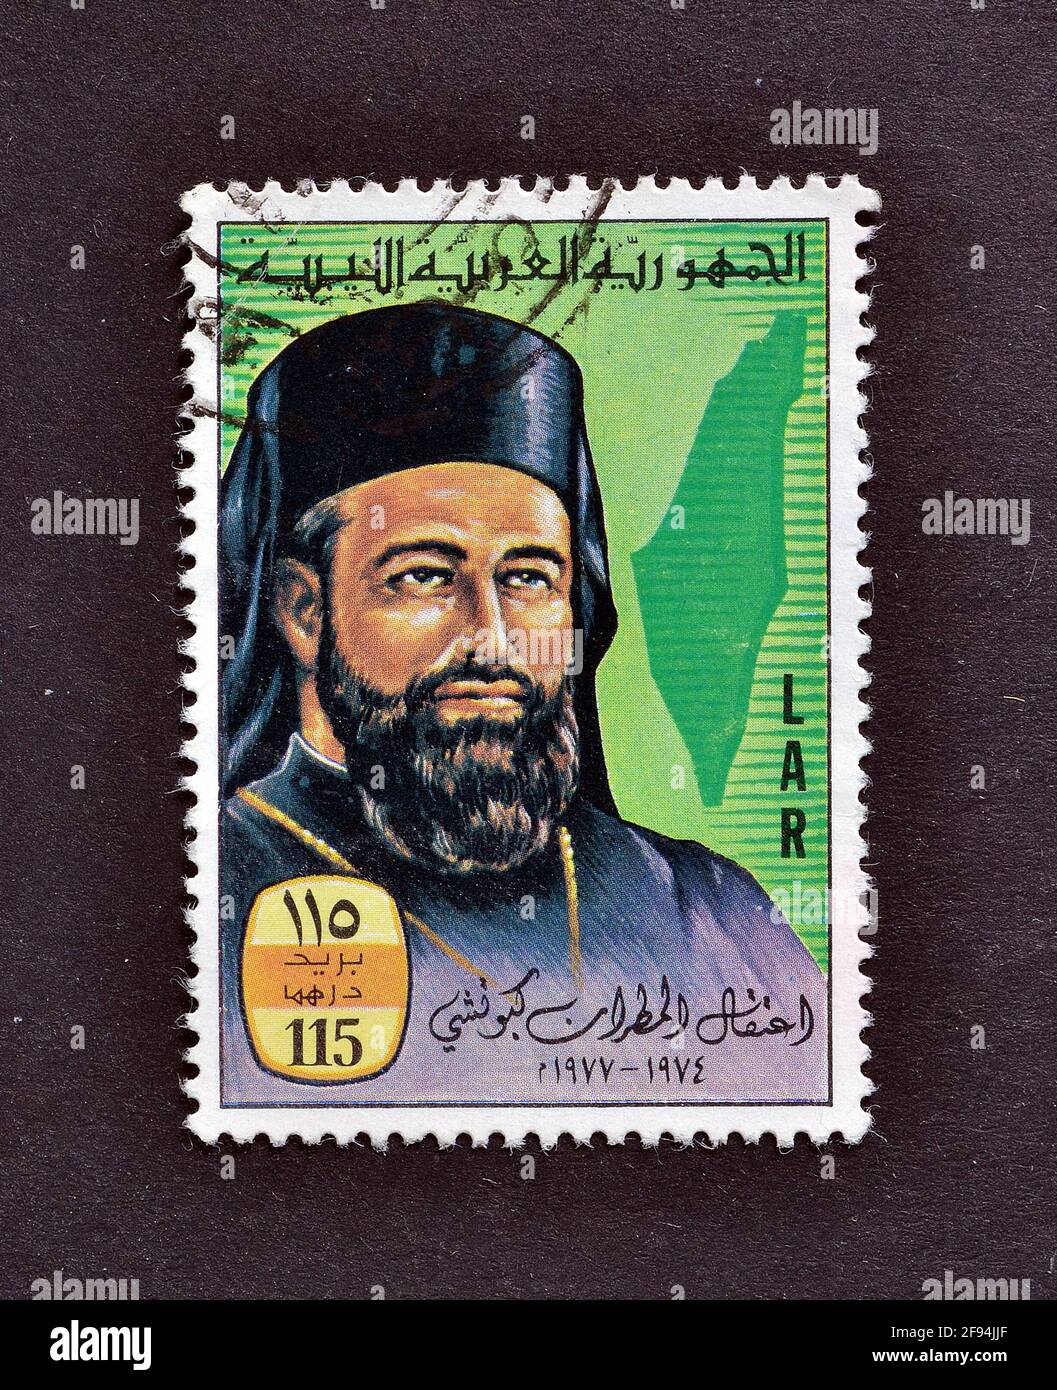 Cancelled postage stamp printed by Libya, that shows portrait of Archbishop Hilarion Capucci and map of Palestine, circa 1977. Stock Photo